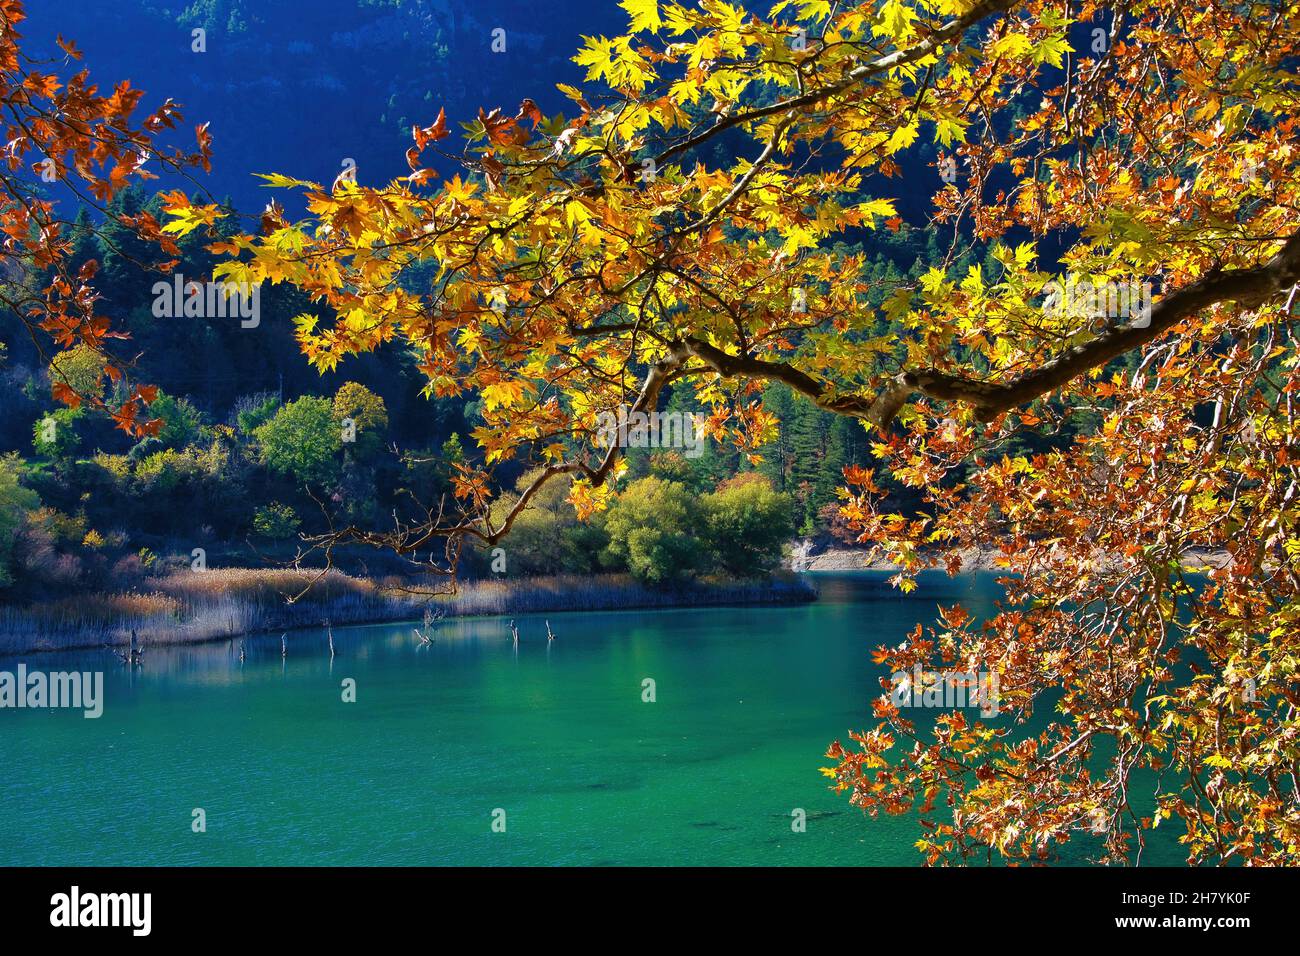 Beautiful lake in autumn with colorful tree leaves Stock Photo